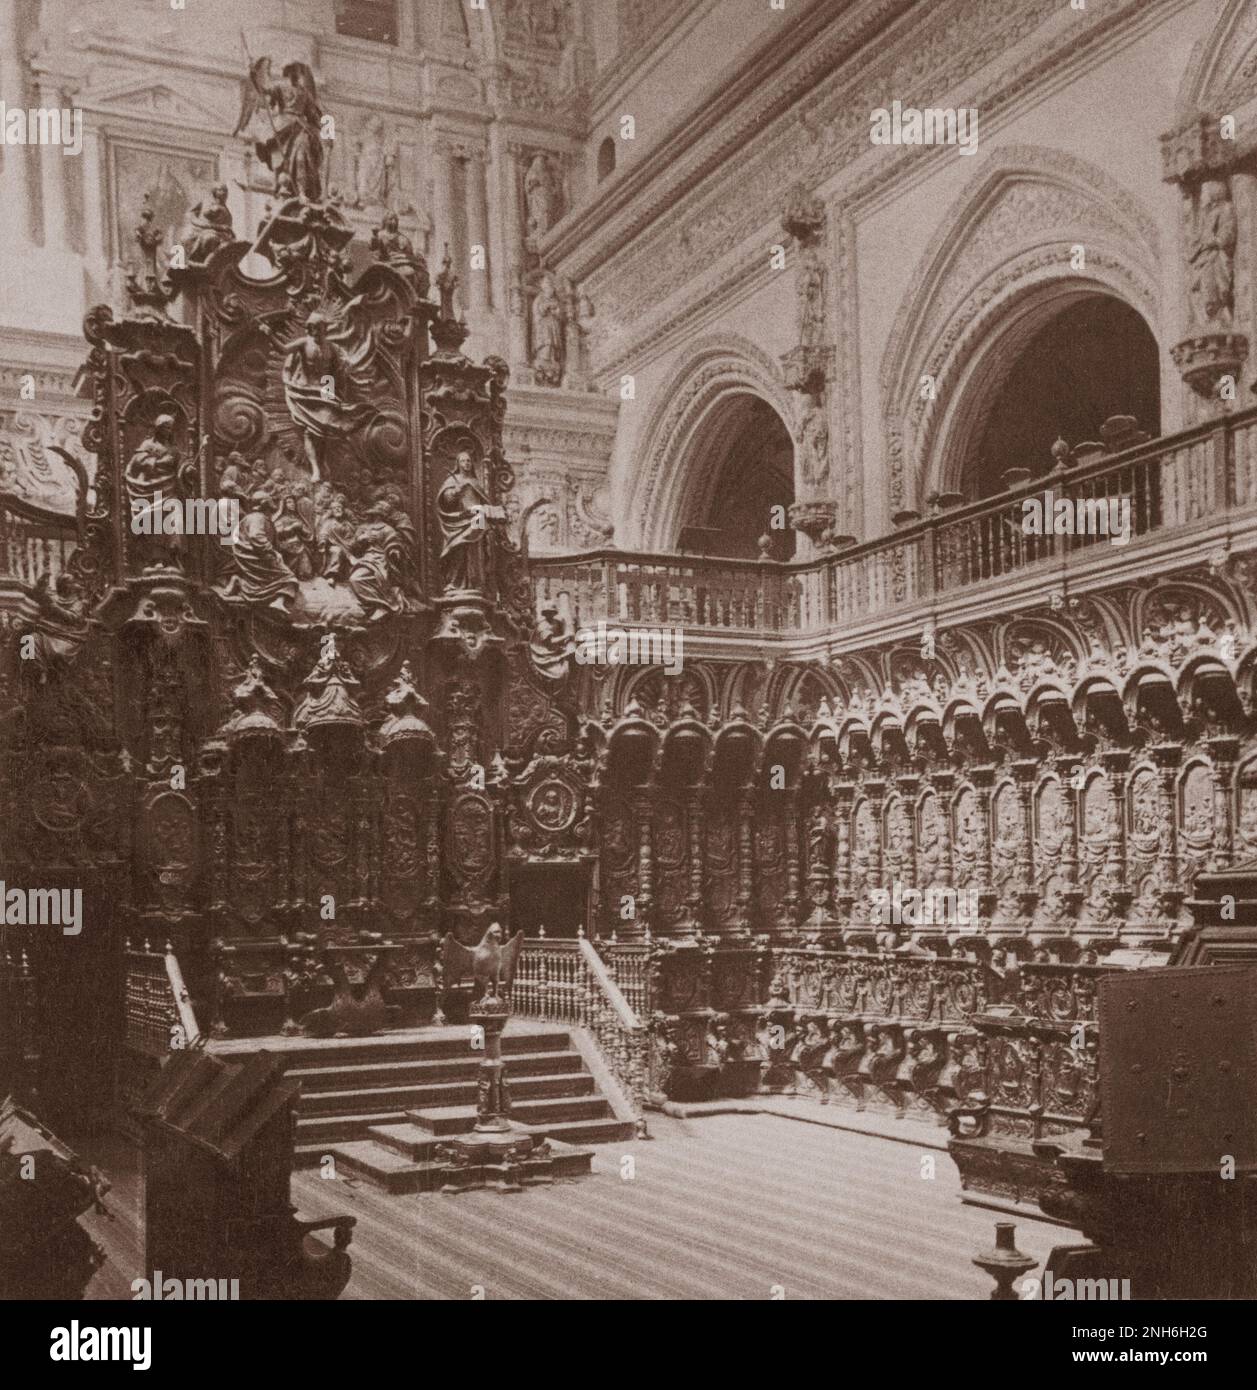 Architecture of Old Spain. The baroque-carved bishop's seat and choir of the cathedral-mosque, Cordoba, Spain. 1902 Stock Photo